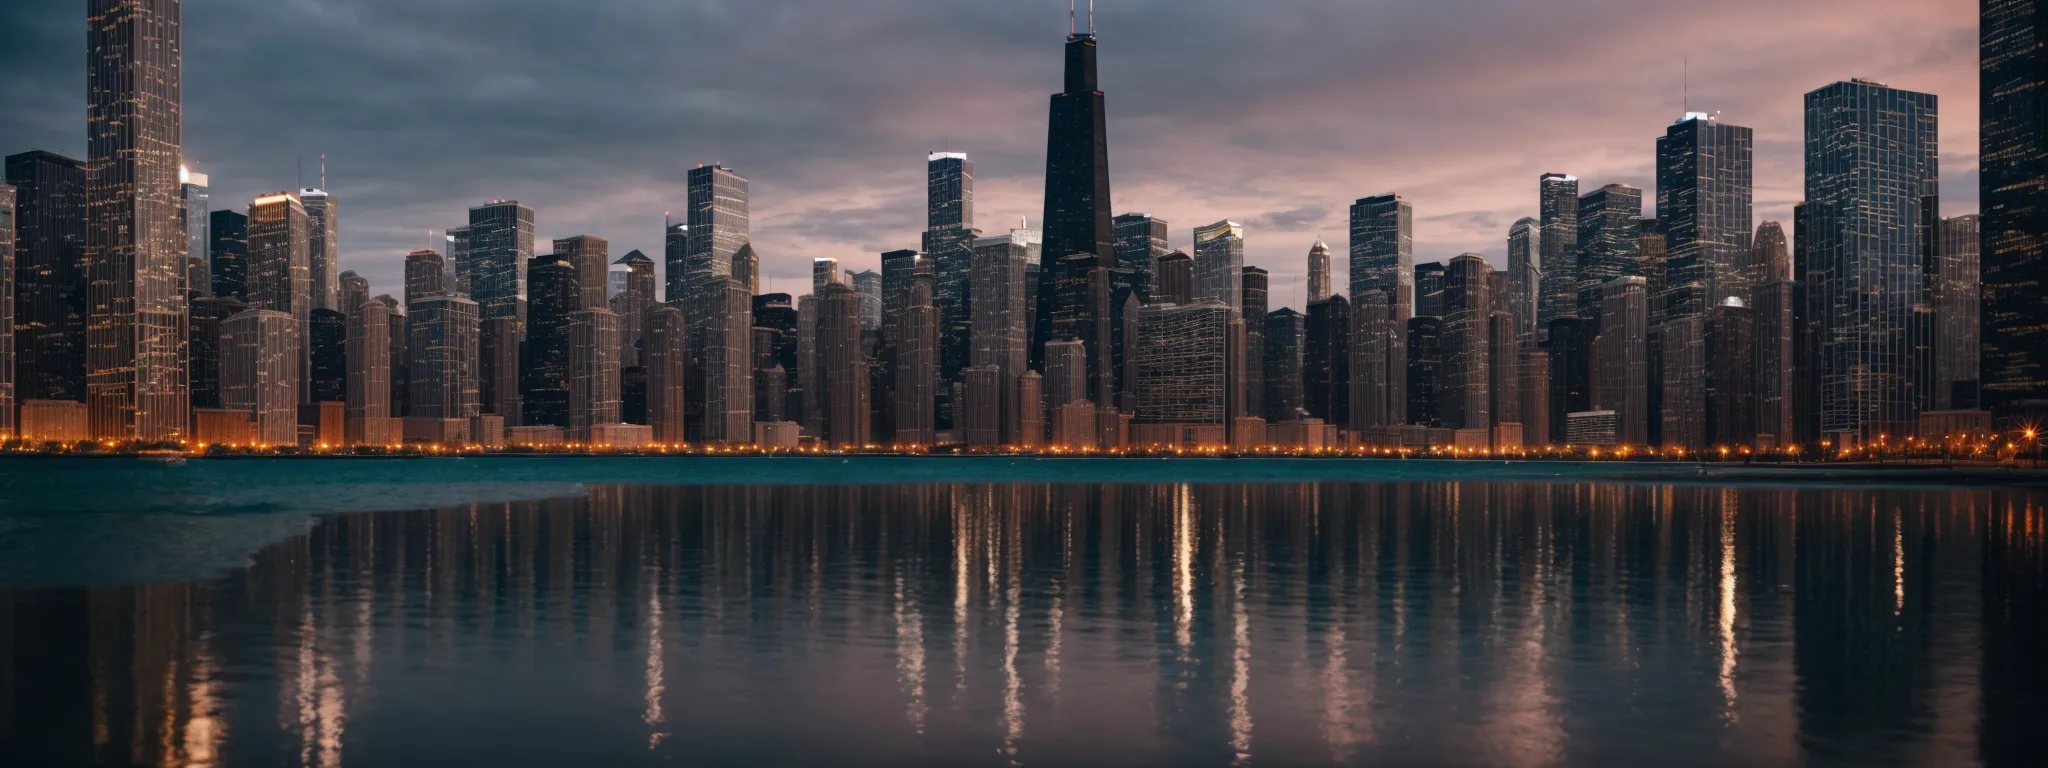 reflect the skyline of chicago with a focus on digital screens showcasing various local businesses.